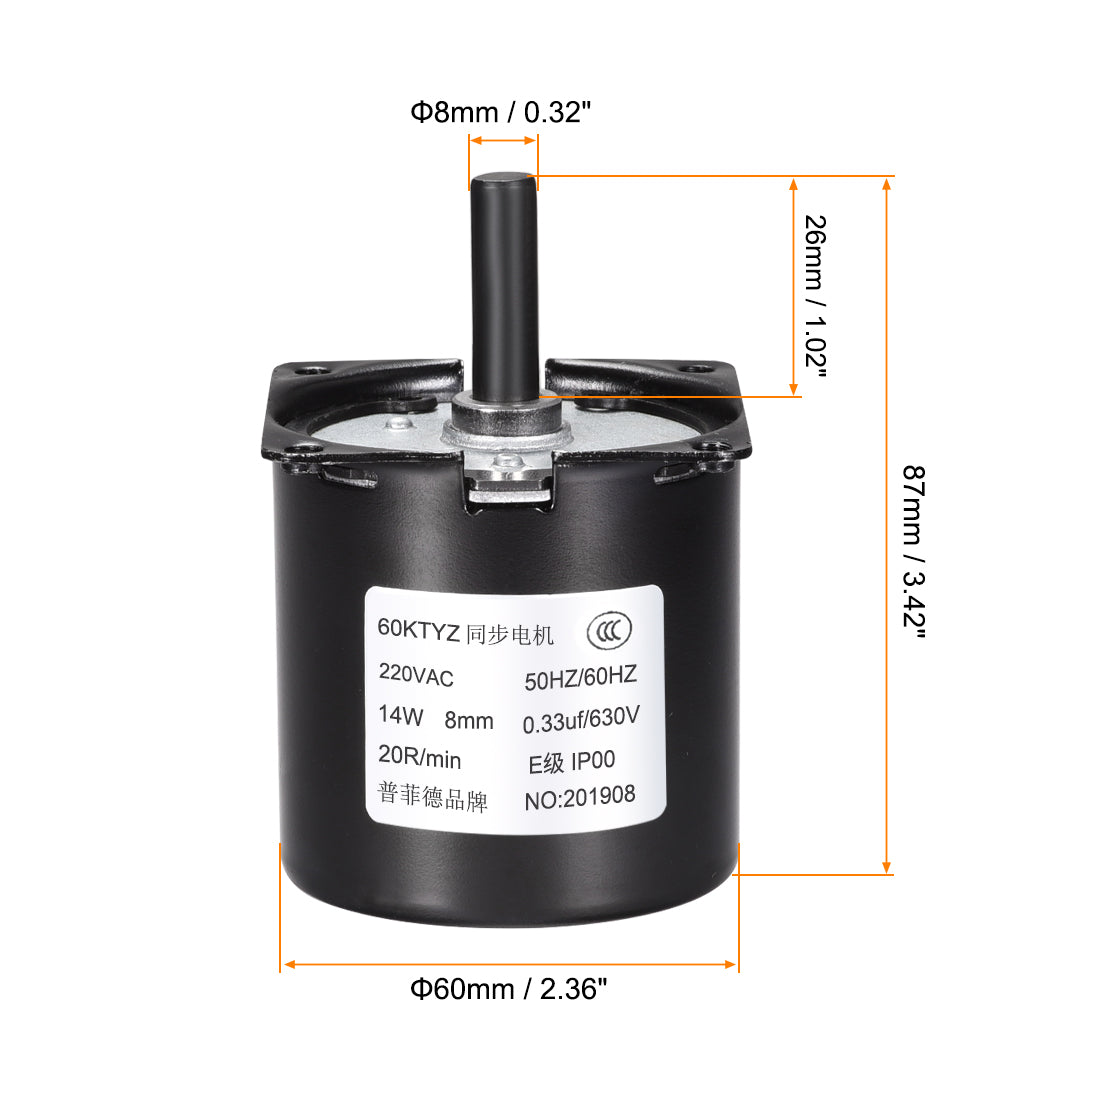 uxcell Uxcell AC 220V Electric Synchronous Motor Metal Gear Turntable /C 20RPM 50-60HZ 14W 8mm Dia Central Shaft